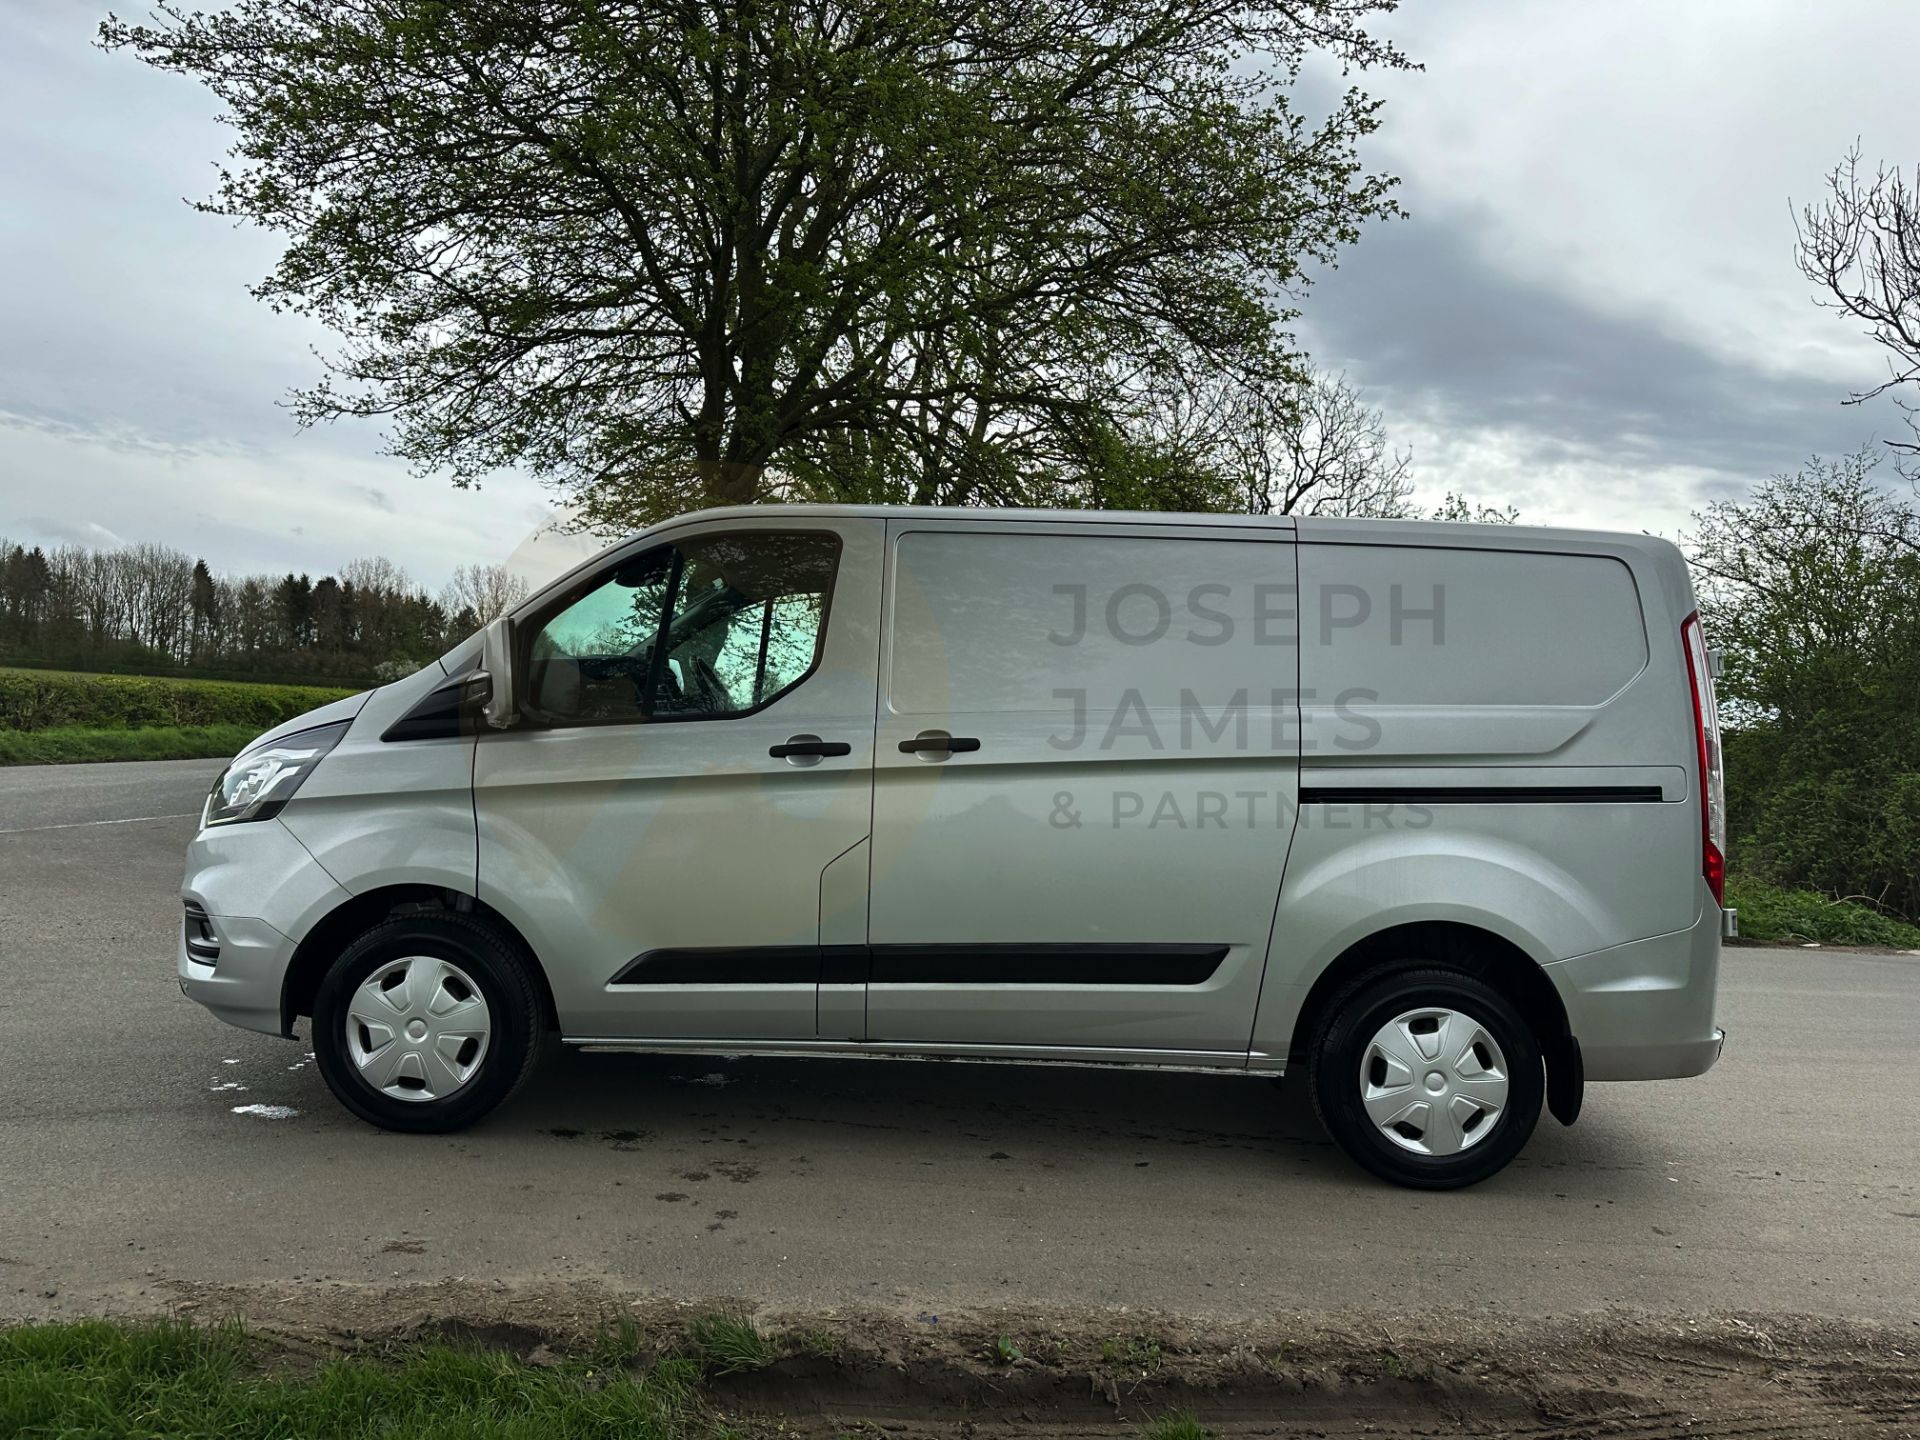 FORD TRANSIT CUSTOM "TREND" 2.0TDCI (130) 20 REG -1 OWNER- SILVER -GREAT SPEC -LOW MILEAGE - Image 8 of 38